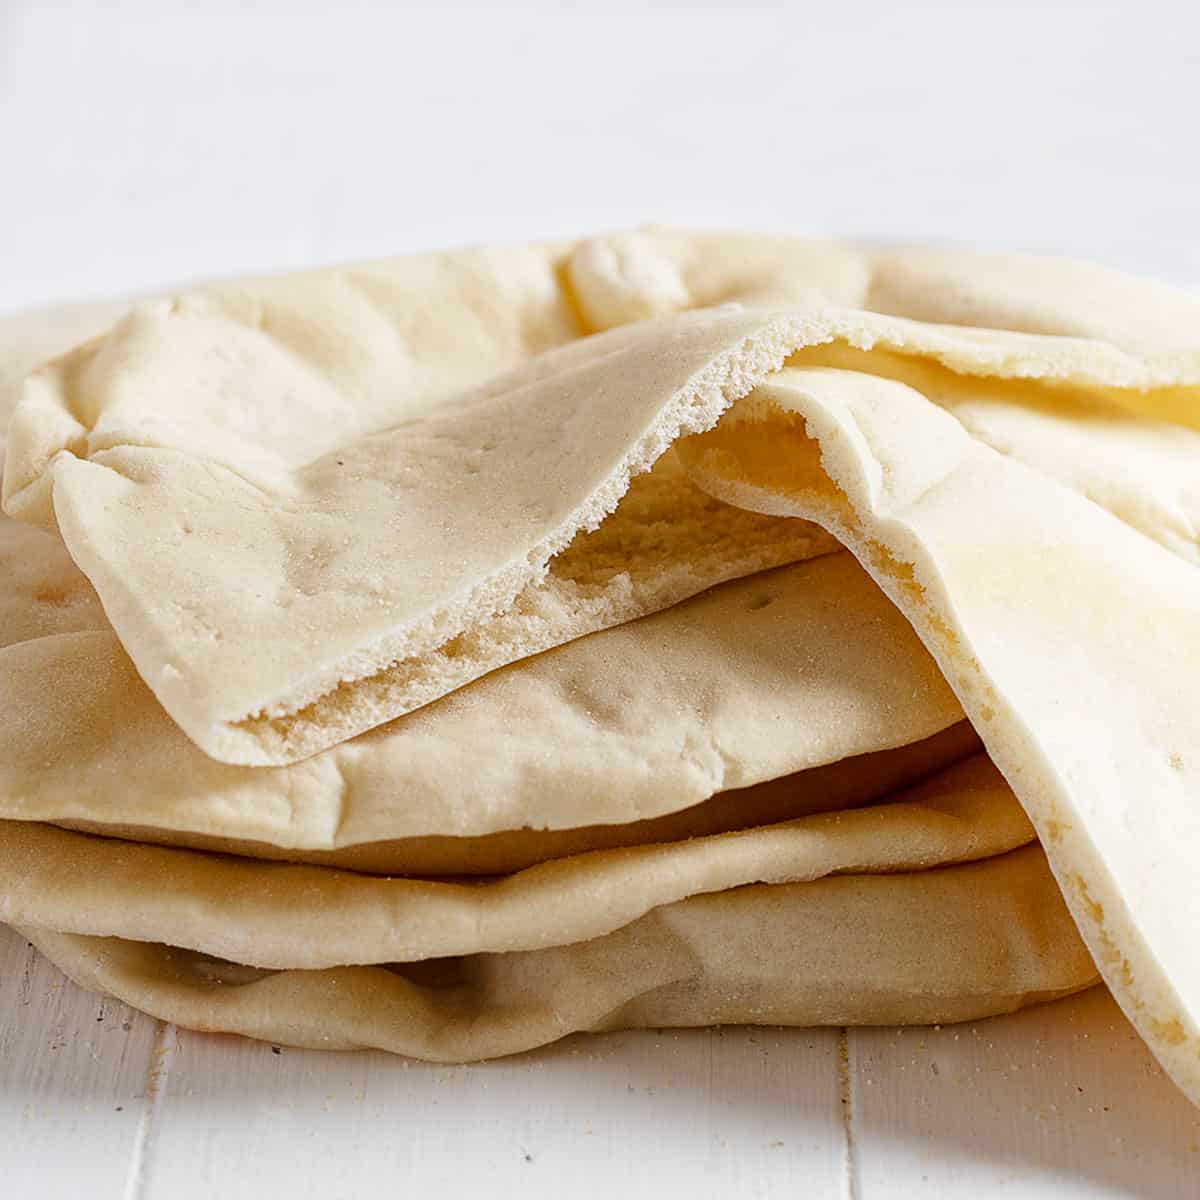 Homemade Pita Bread with Pockets - Seasons and Suppers